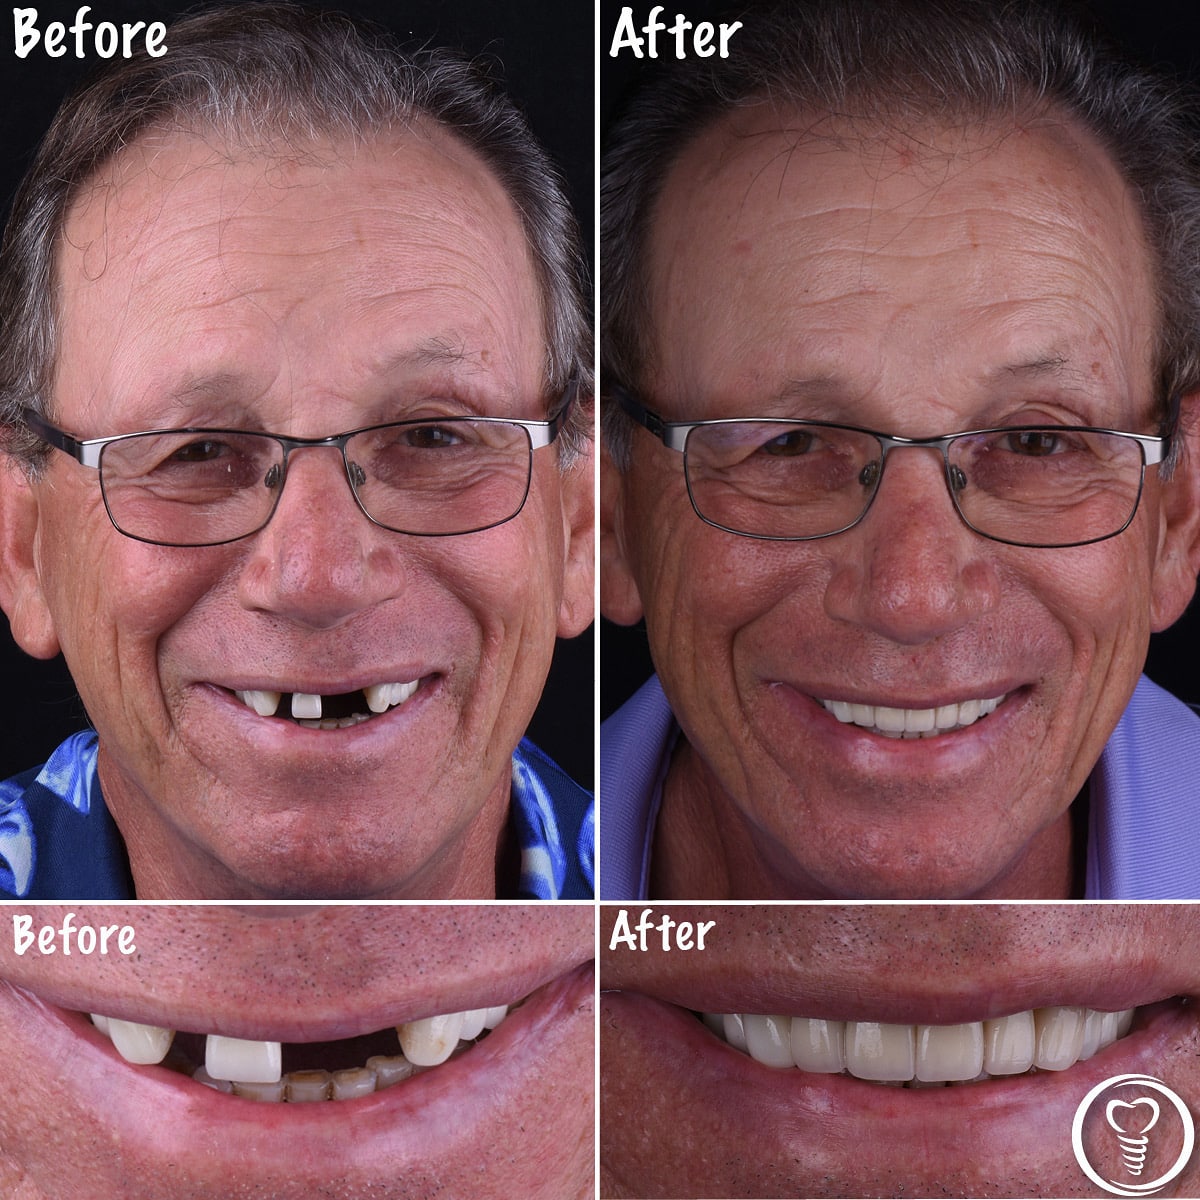 A mature guy learns how to get healthy gums and teeth.